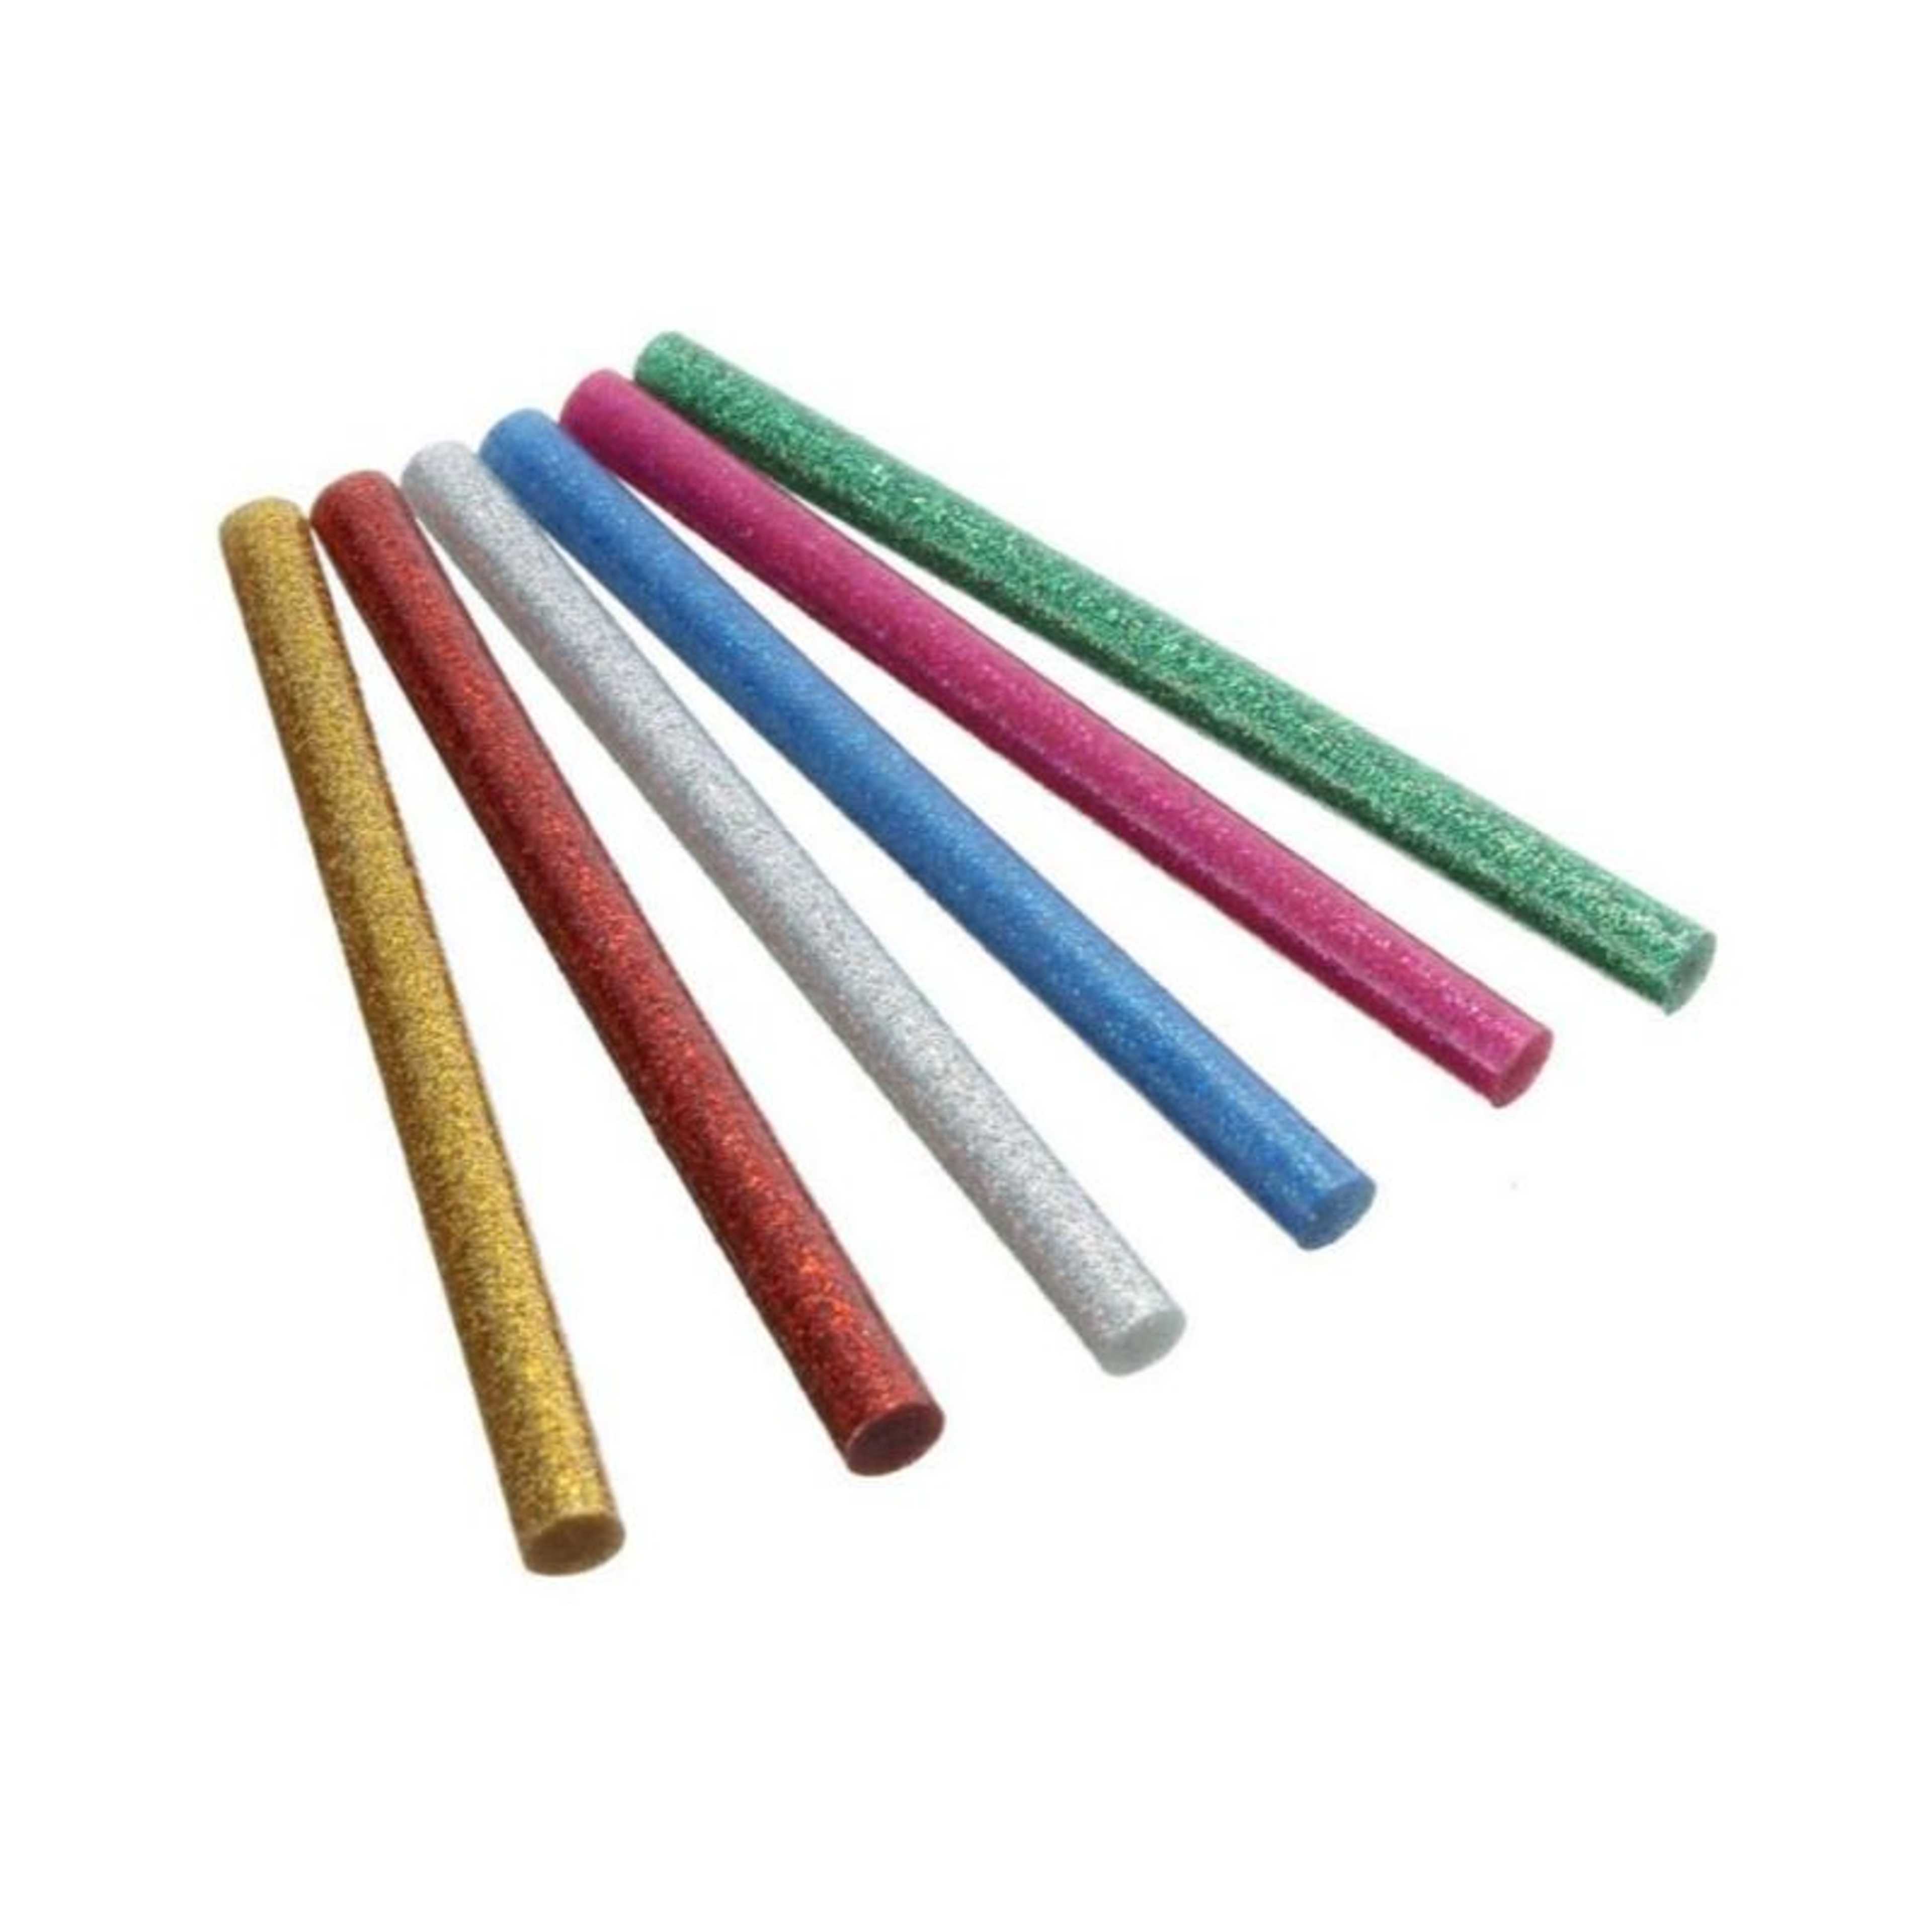 Pack of 6 - Glitter Adhesive Glue Sticks for Hobby Crafting Woodworking